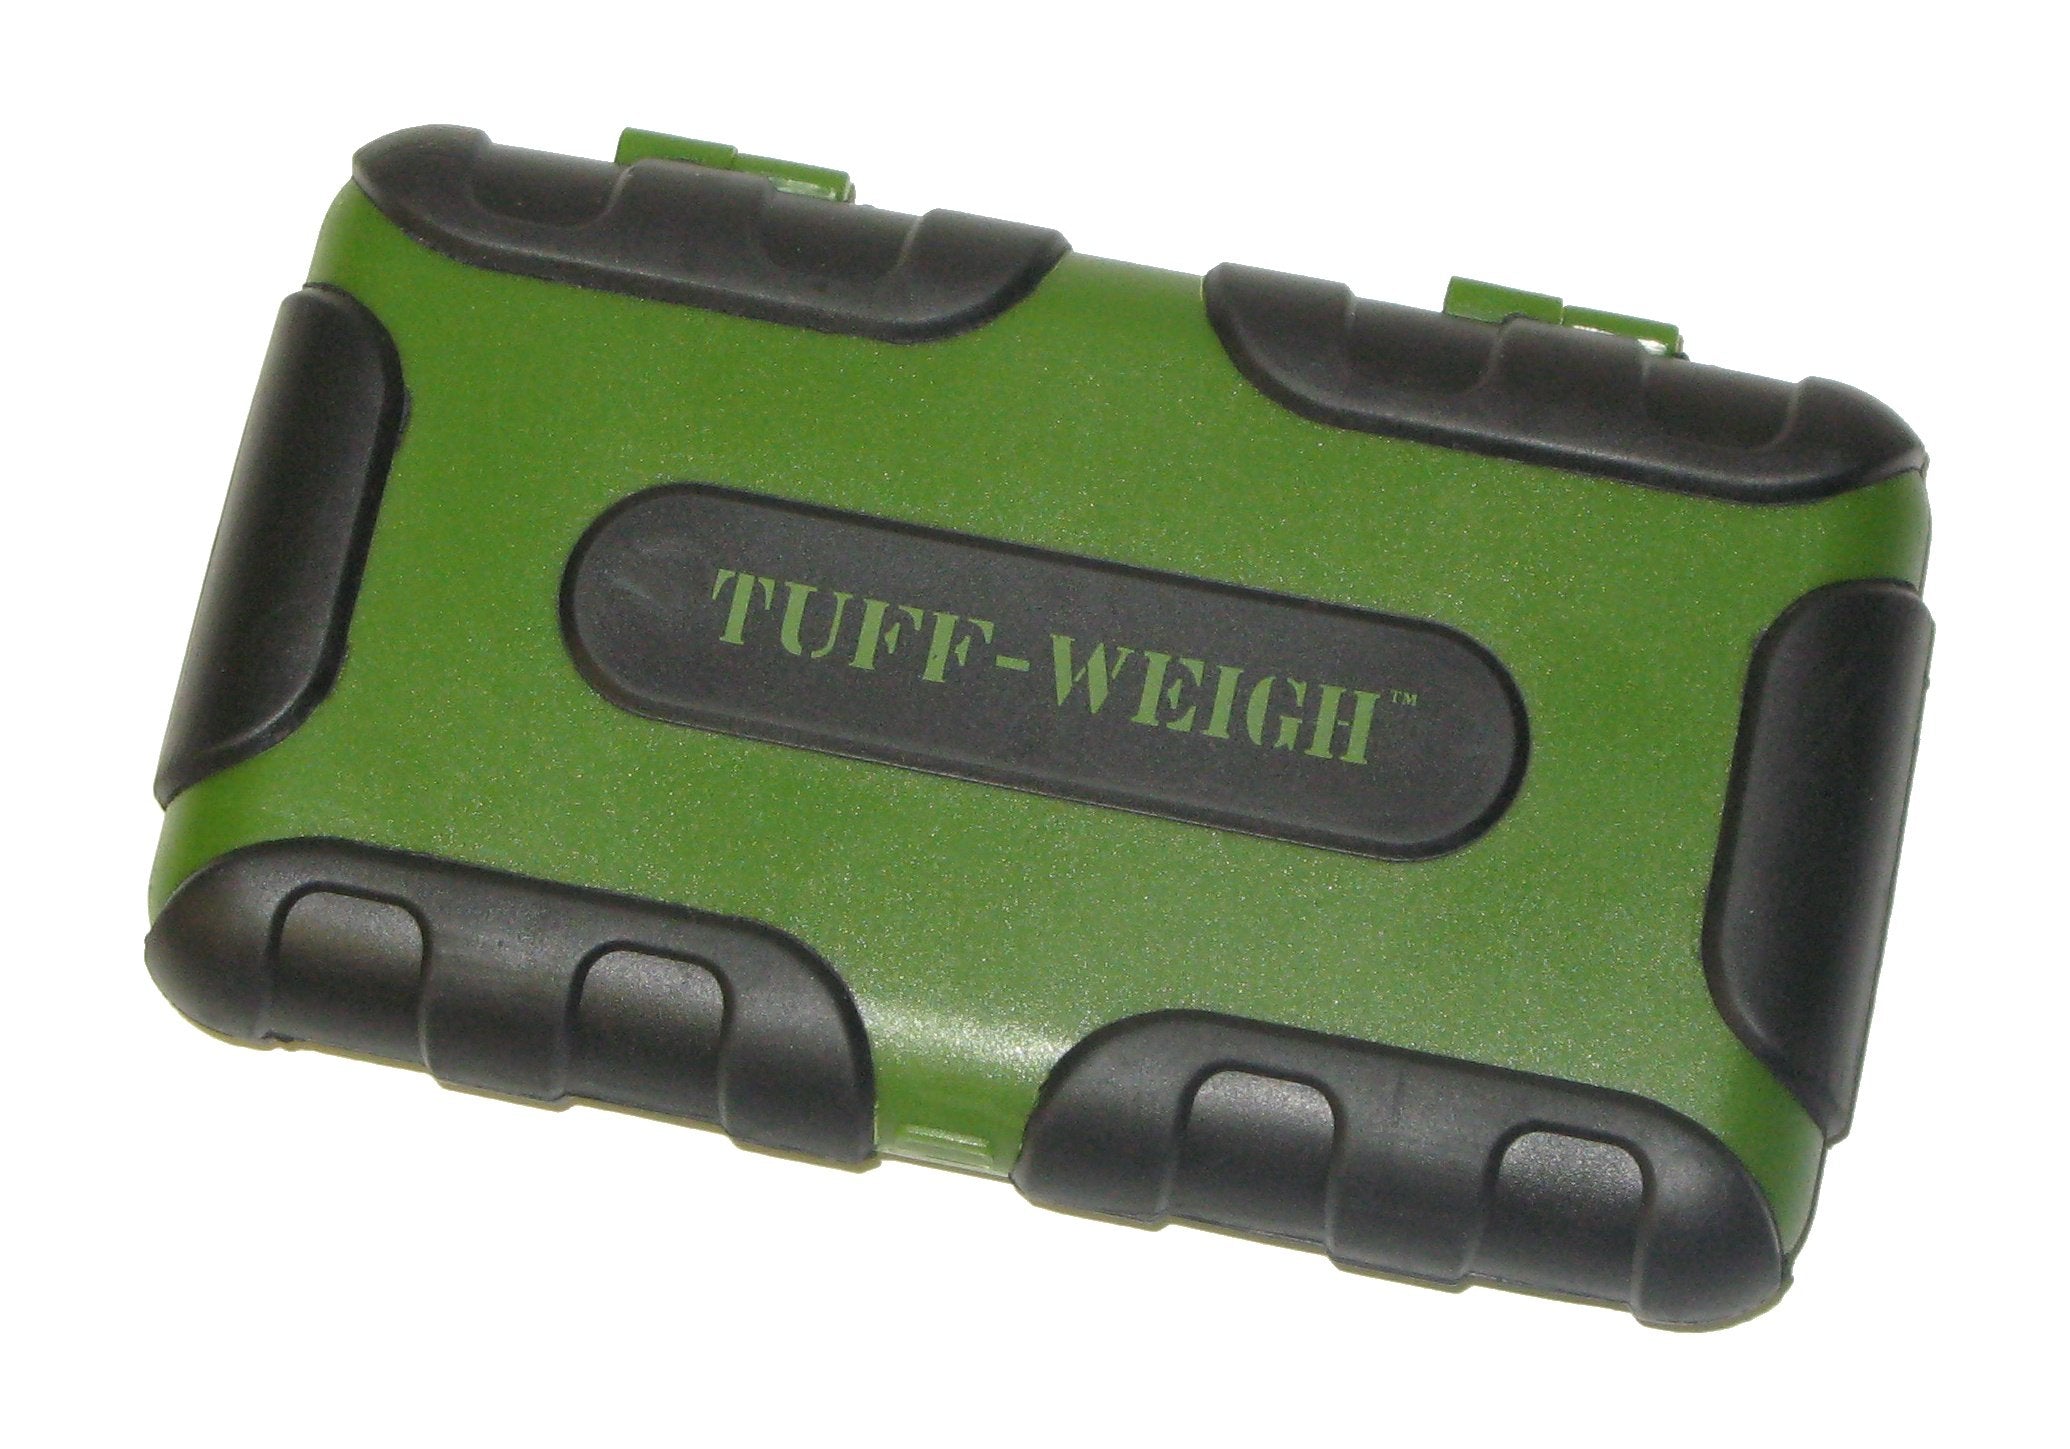 Tuff-Weigh (100g x 0.01g) Impact Resistant Scale with Rubber Grips - GREEN